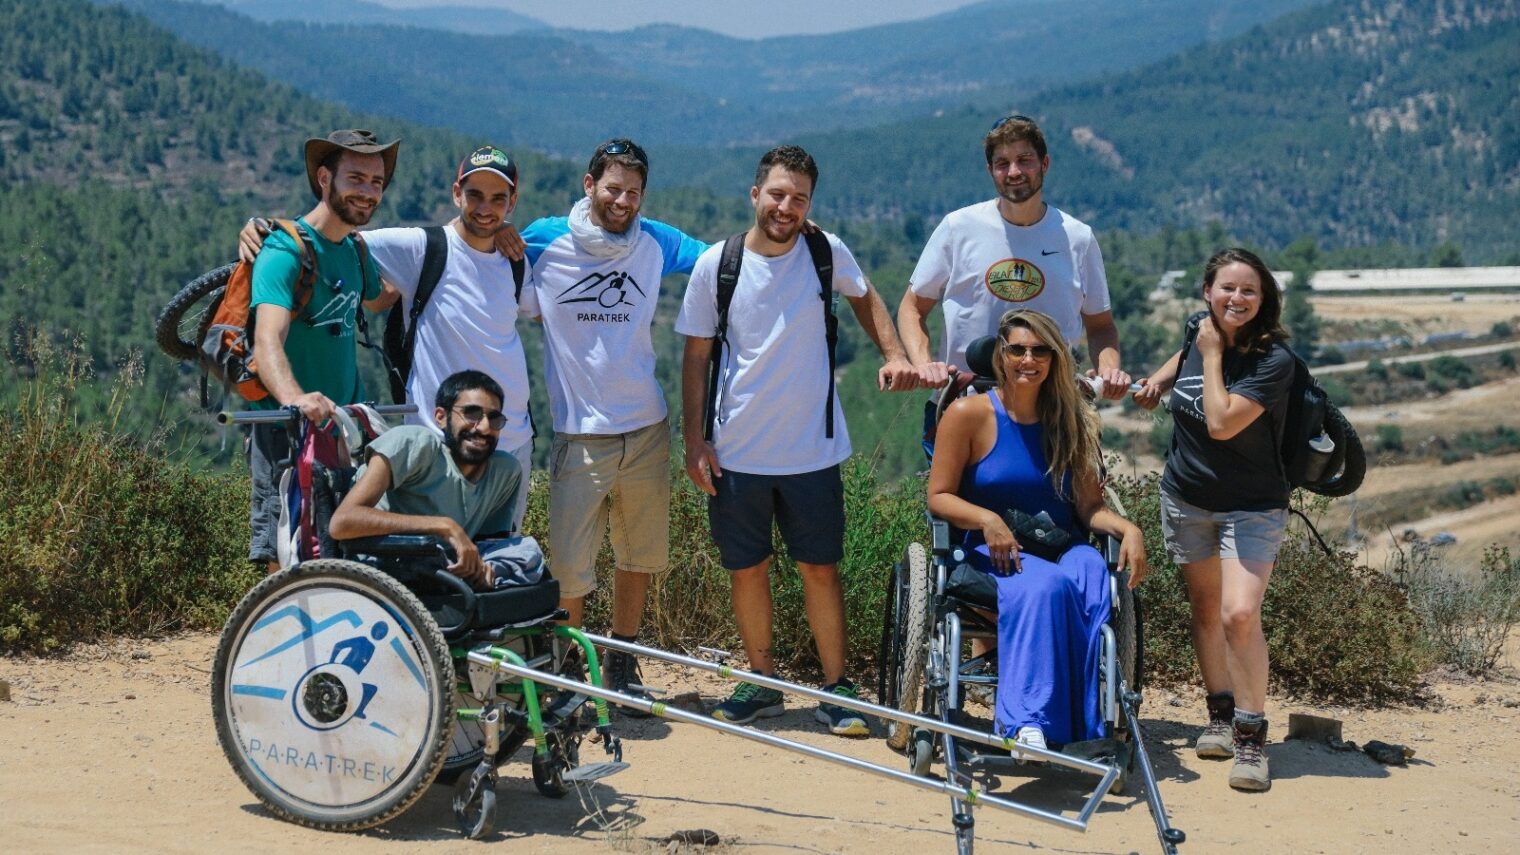 Paratrek enables people with disabilities to enjoy hiking in nature and promotes empowerment, integration and understanding. Photo by Yoav Alon